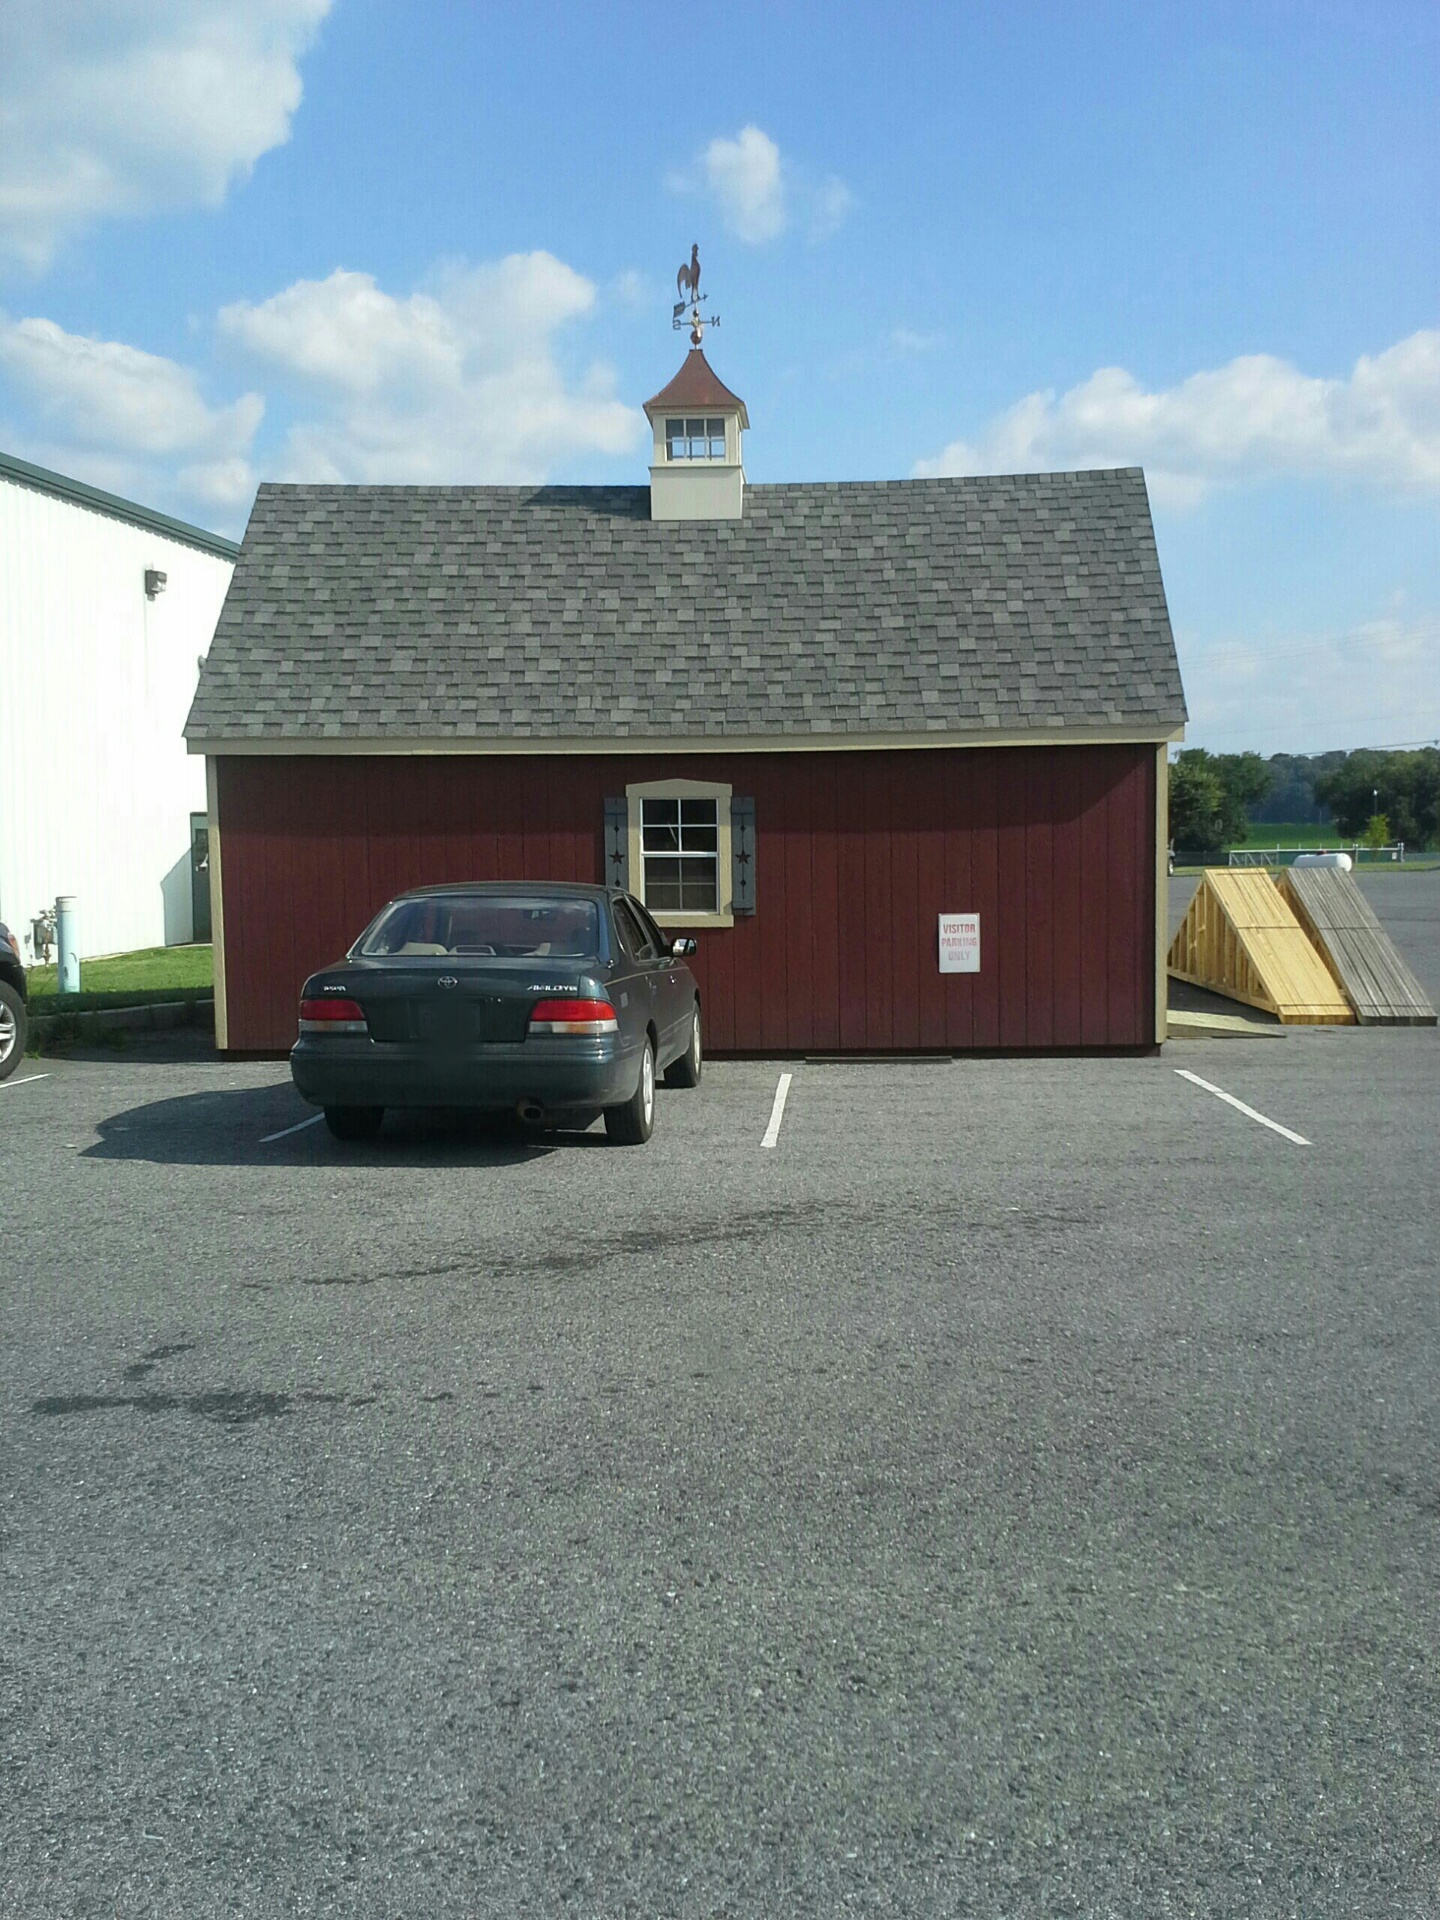 30 inch base cupola on a 24 foot two-car garage with 10:12 roof pitch